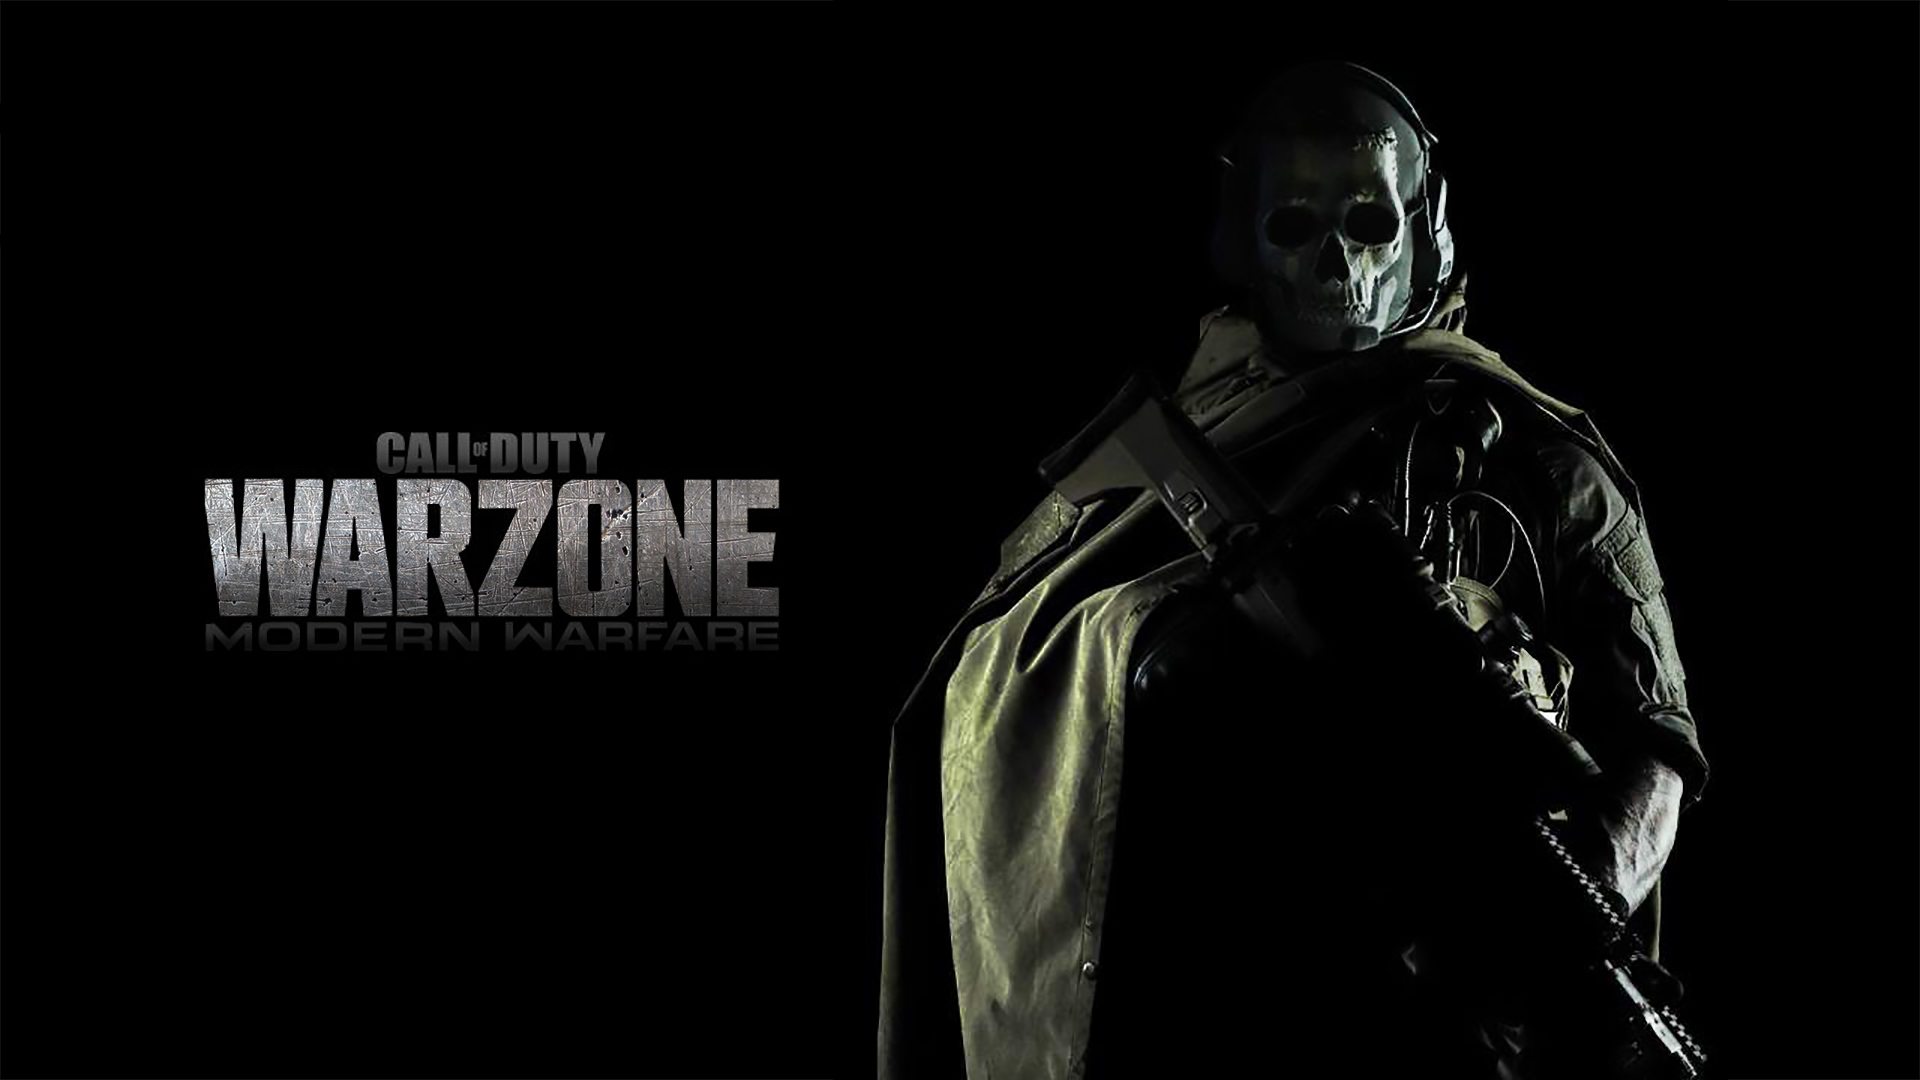 The 10 Most Popular Weapons From CoD Warzone In March - With Player Setups